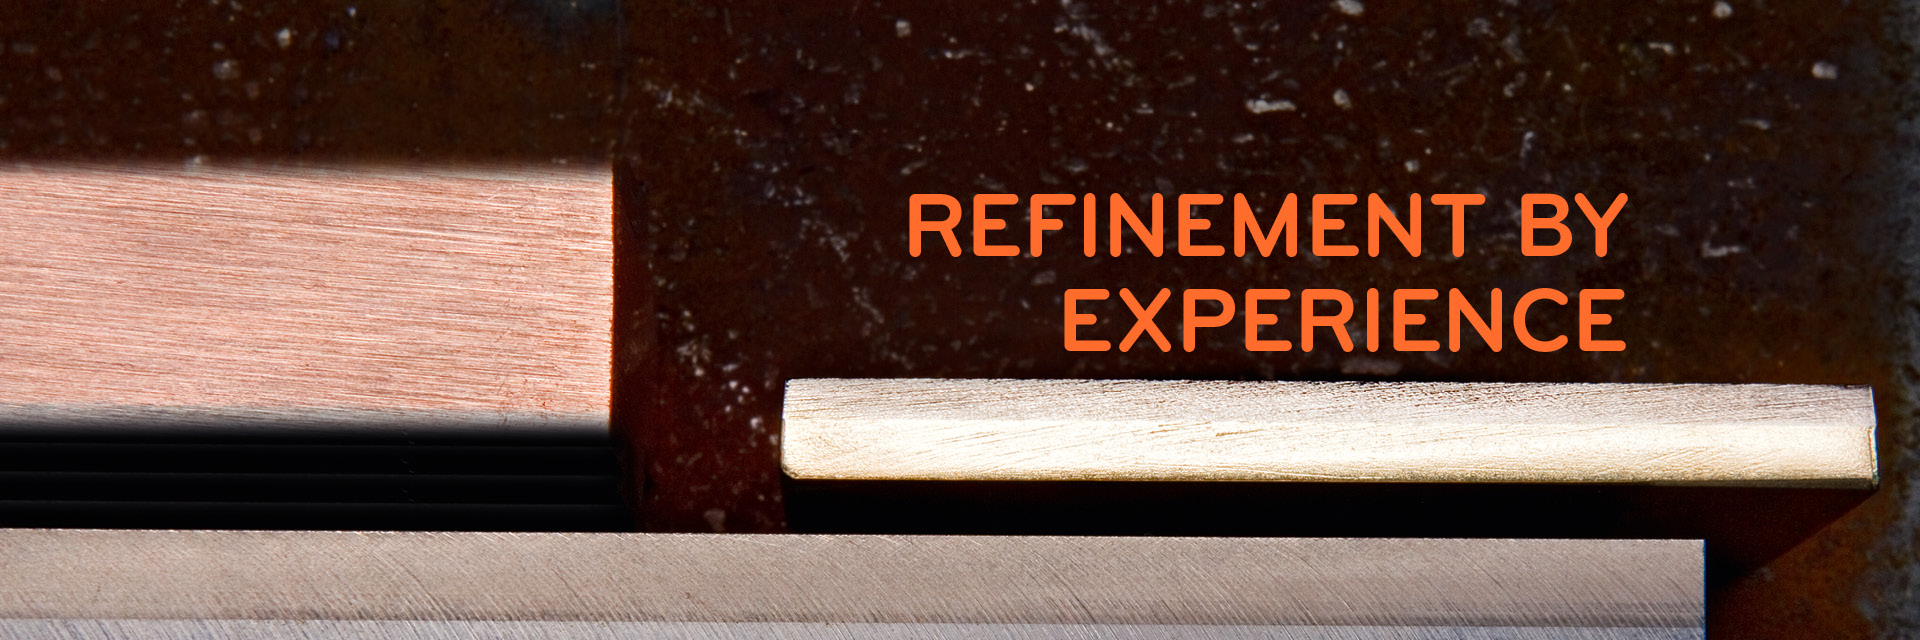 Refinement by experience